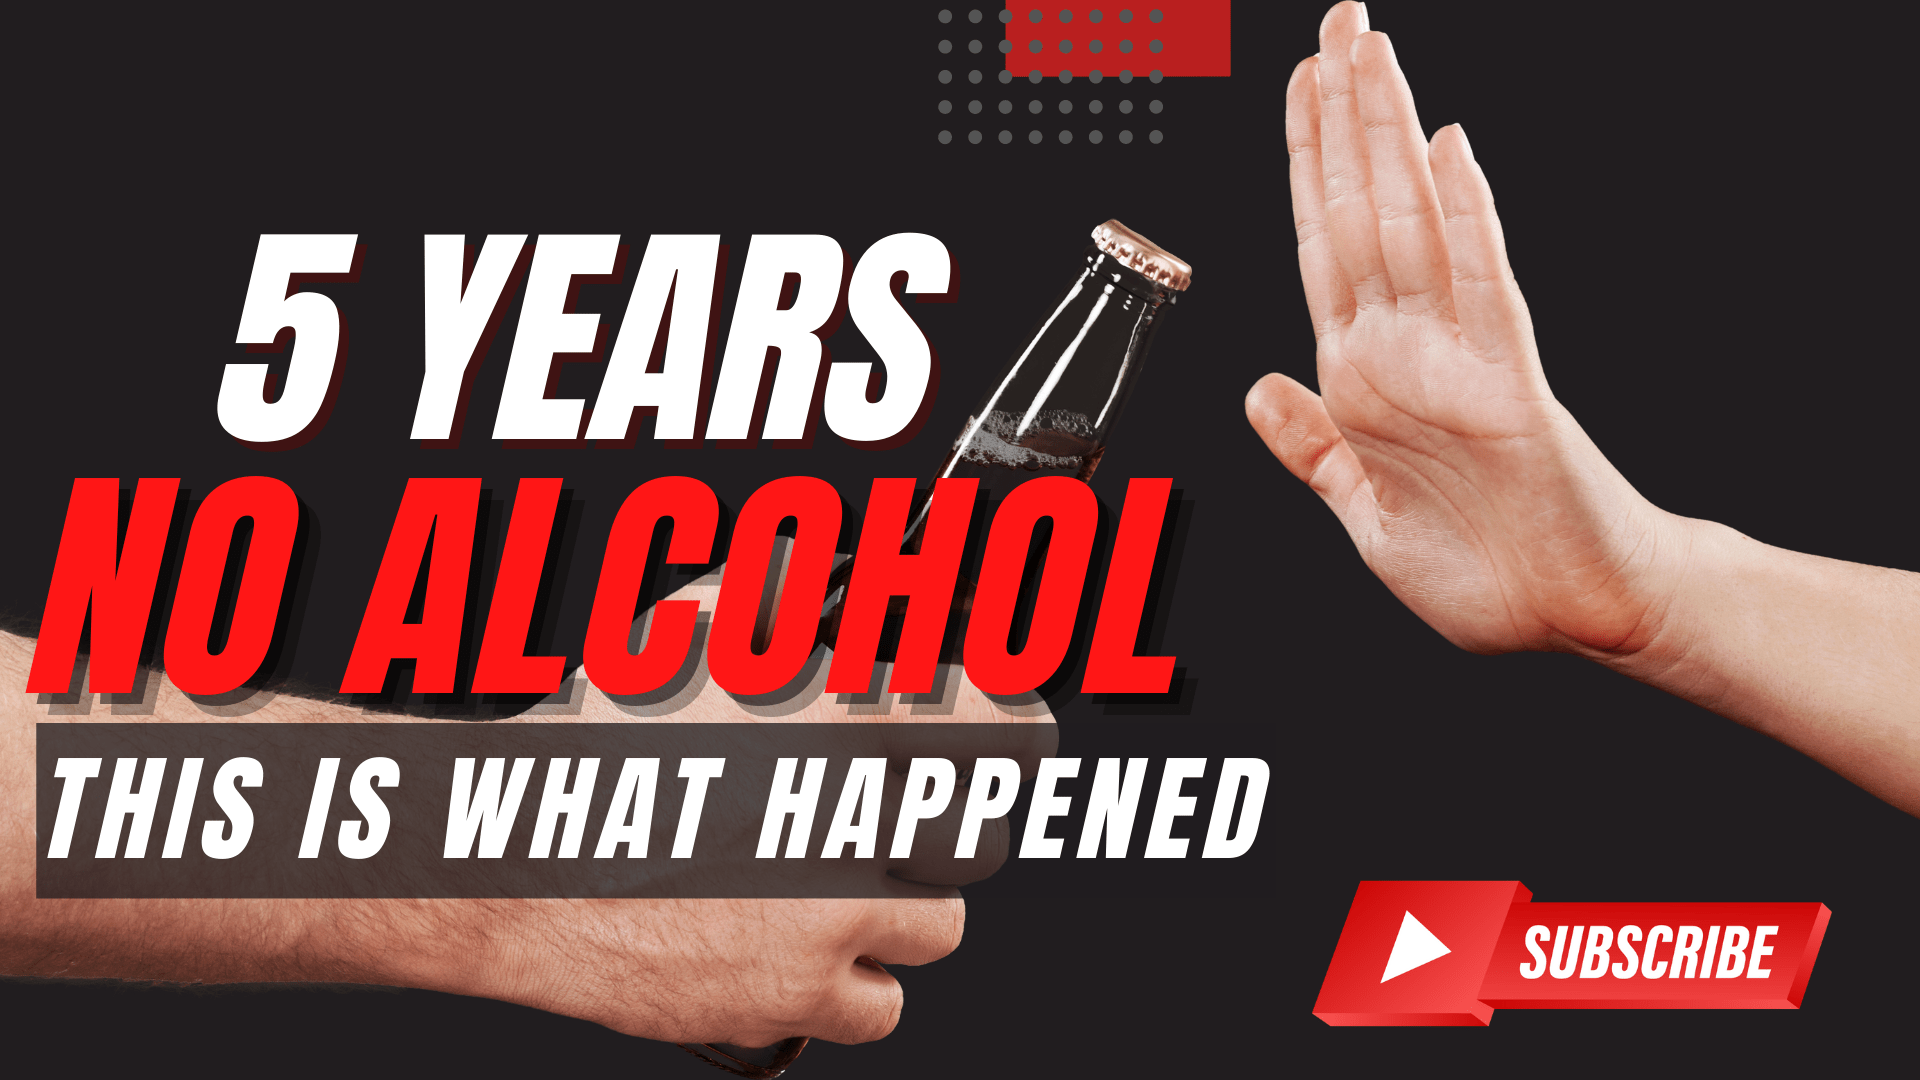 I Quit Alcohol for 5 Years - How My Life Changed